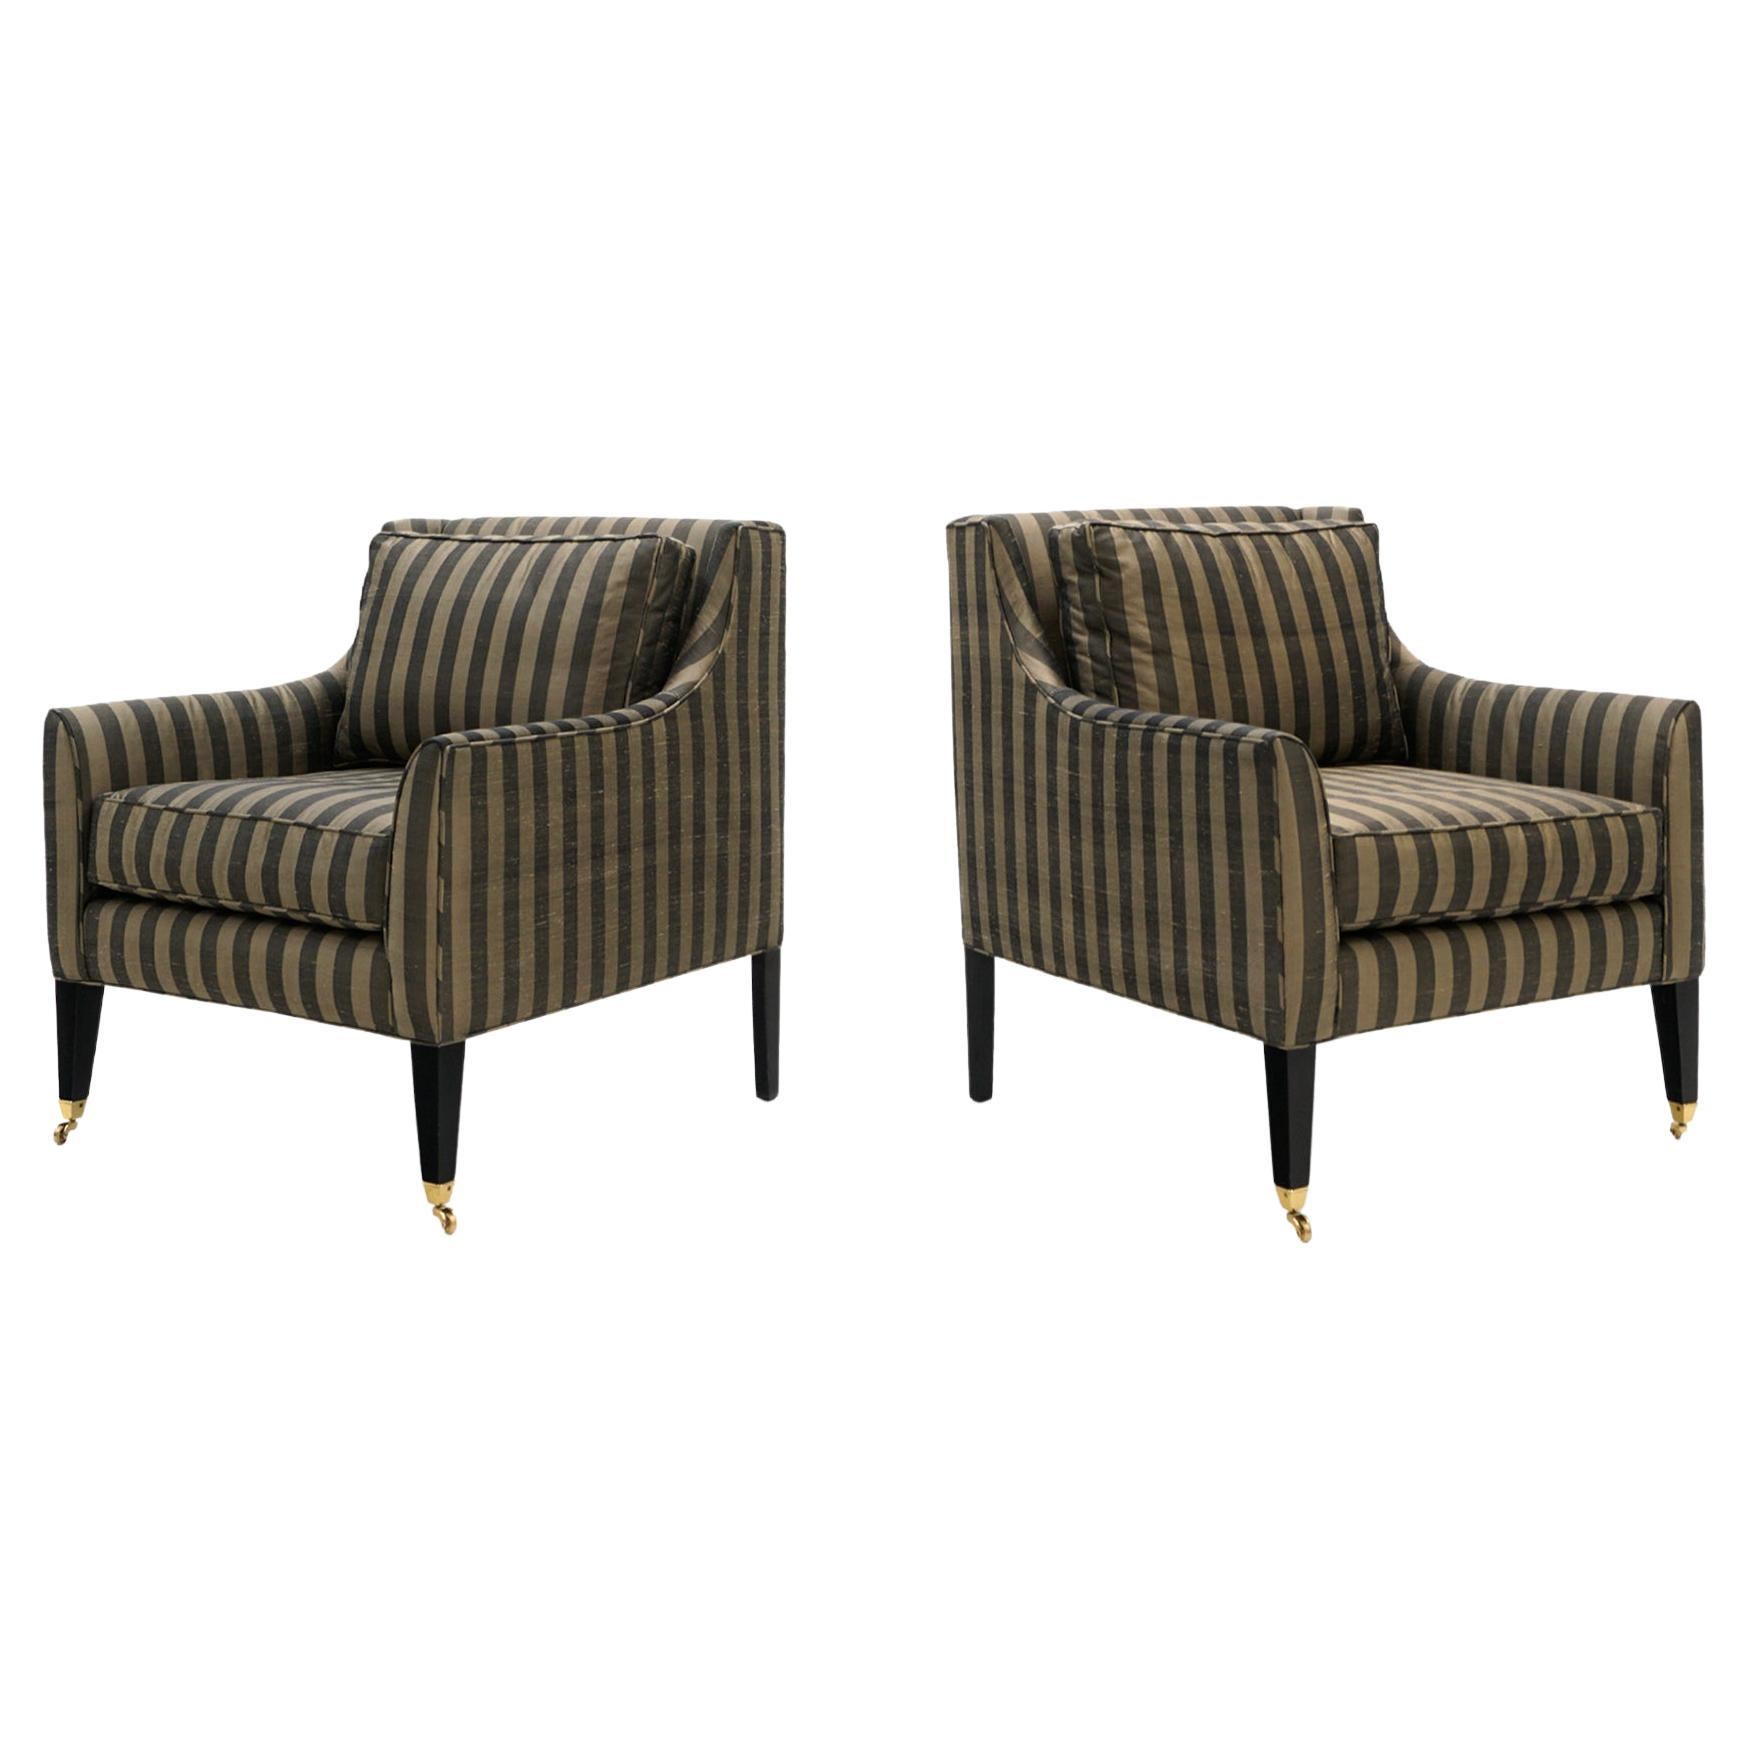 Pair of Lounge Chairs in Tan and Gray Stripes in the Style of Dunbar